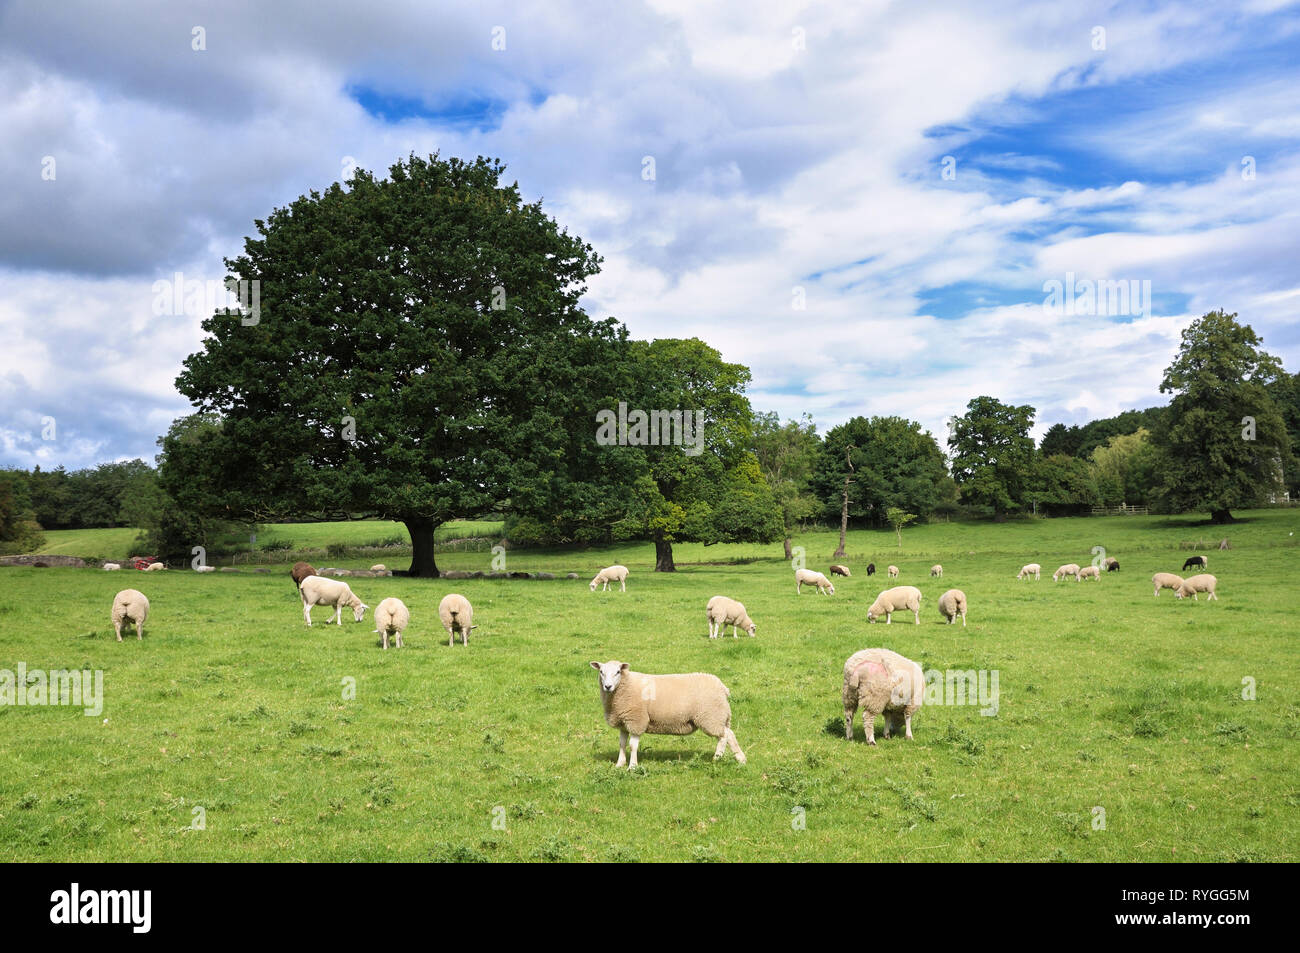 Sheep grazing in a field, Yorkshire, England, UK Stock Photo